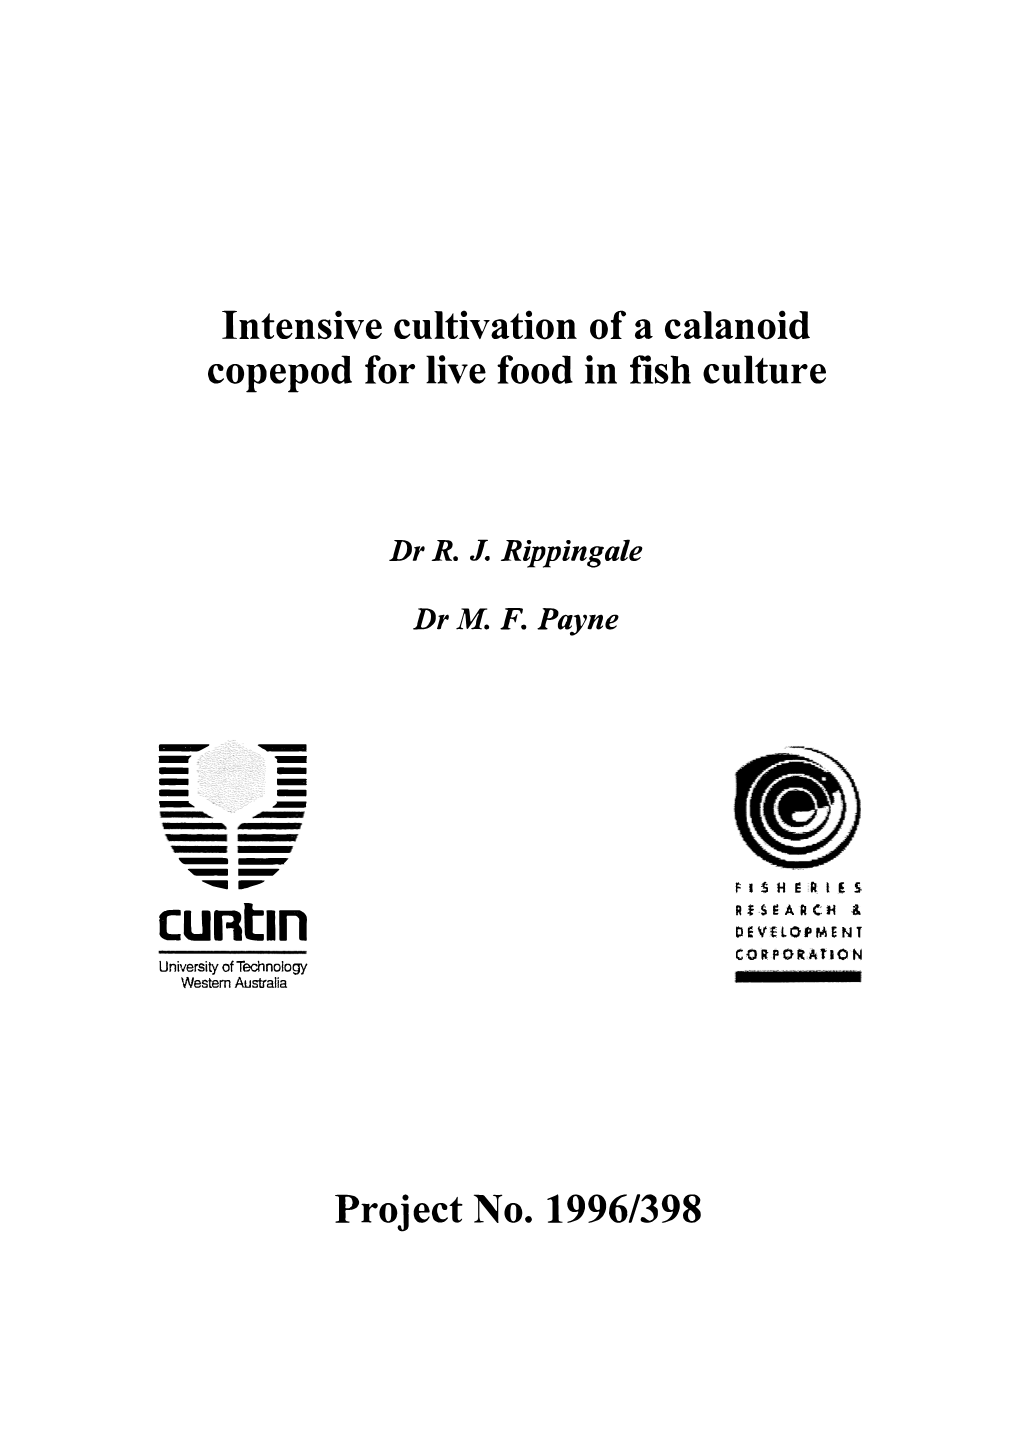 Intensive Cultivation of a Calanoid Copepod for Live Food in Fish Culture